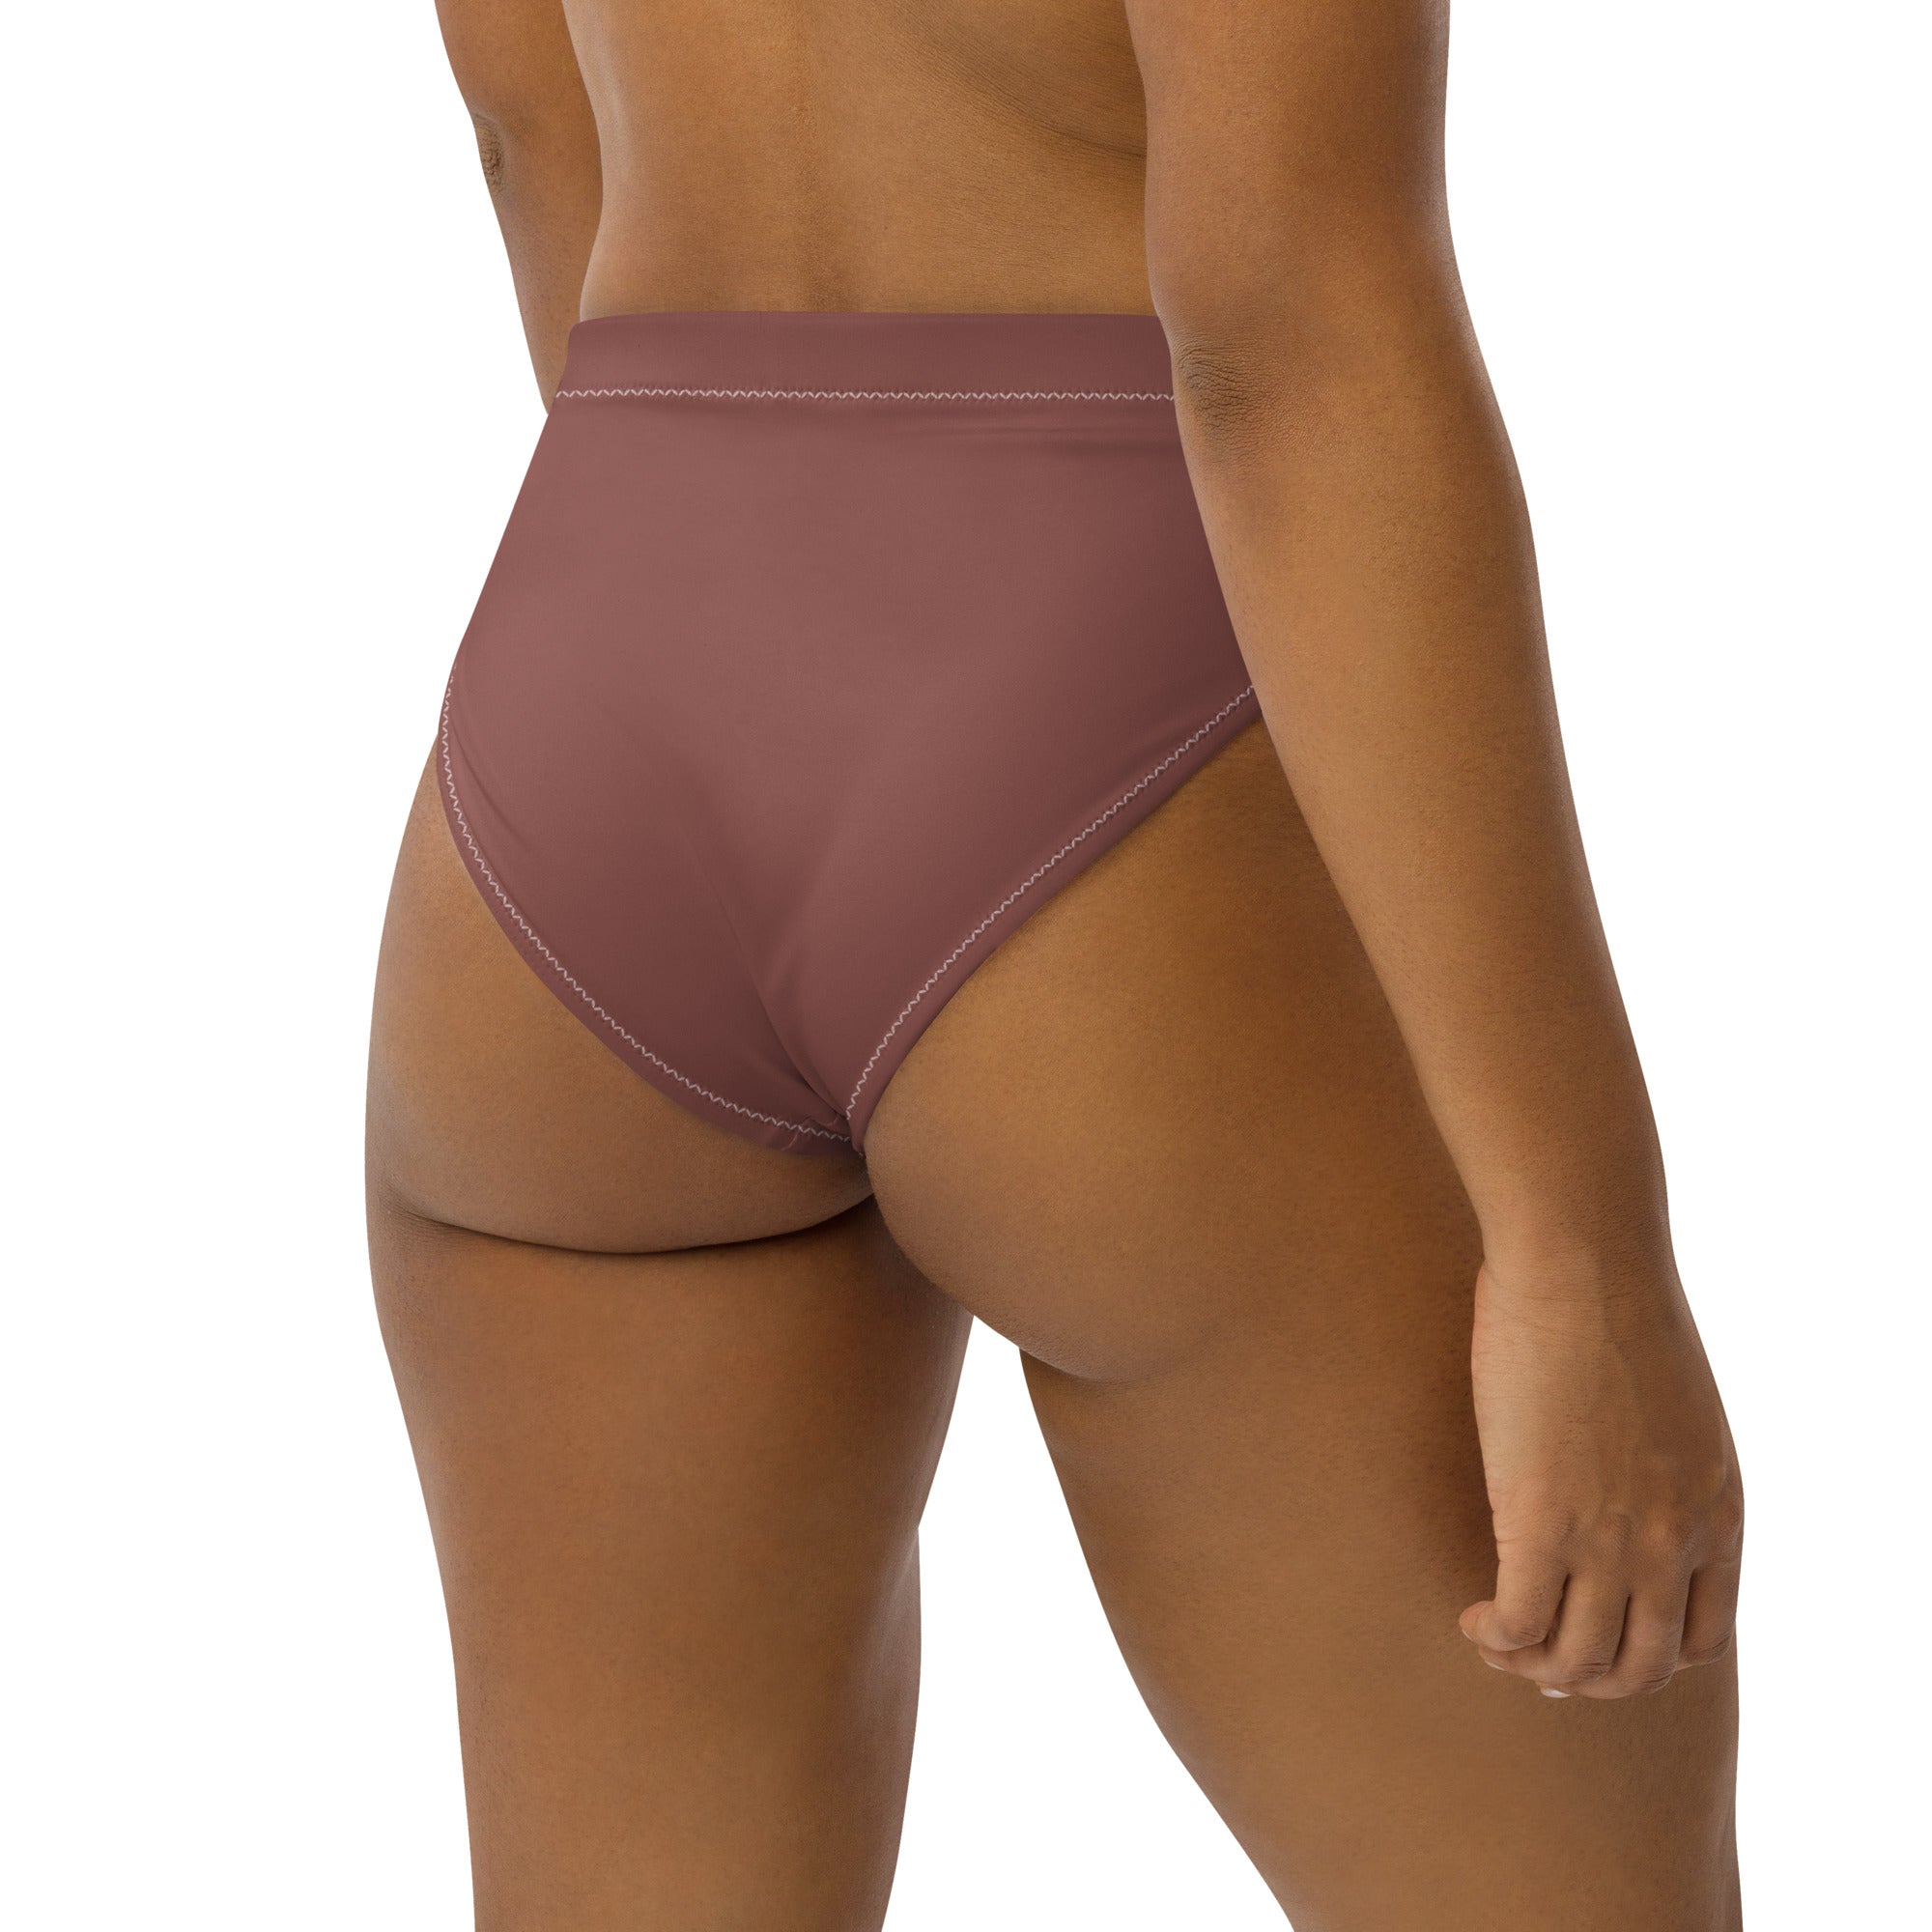 Recycled bikini bottoms in taupe color